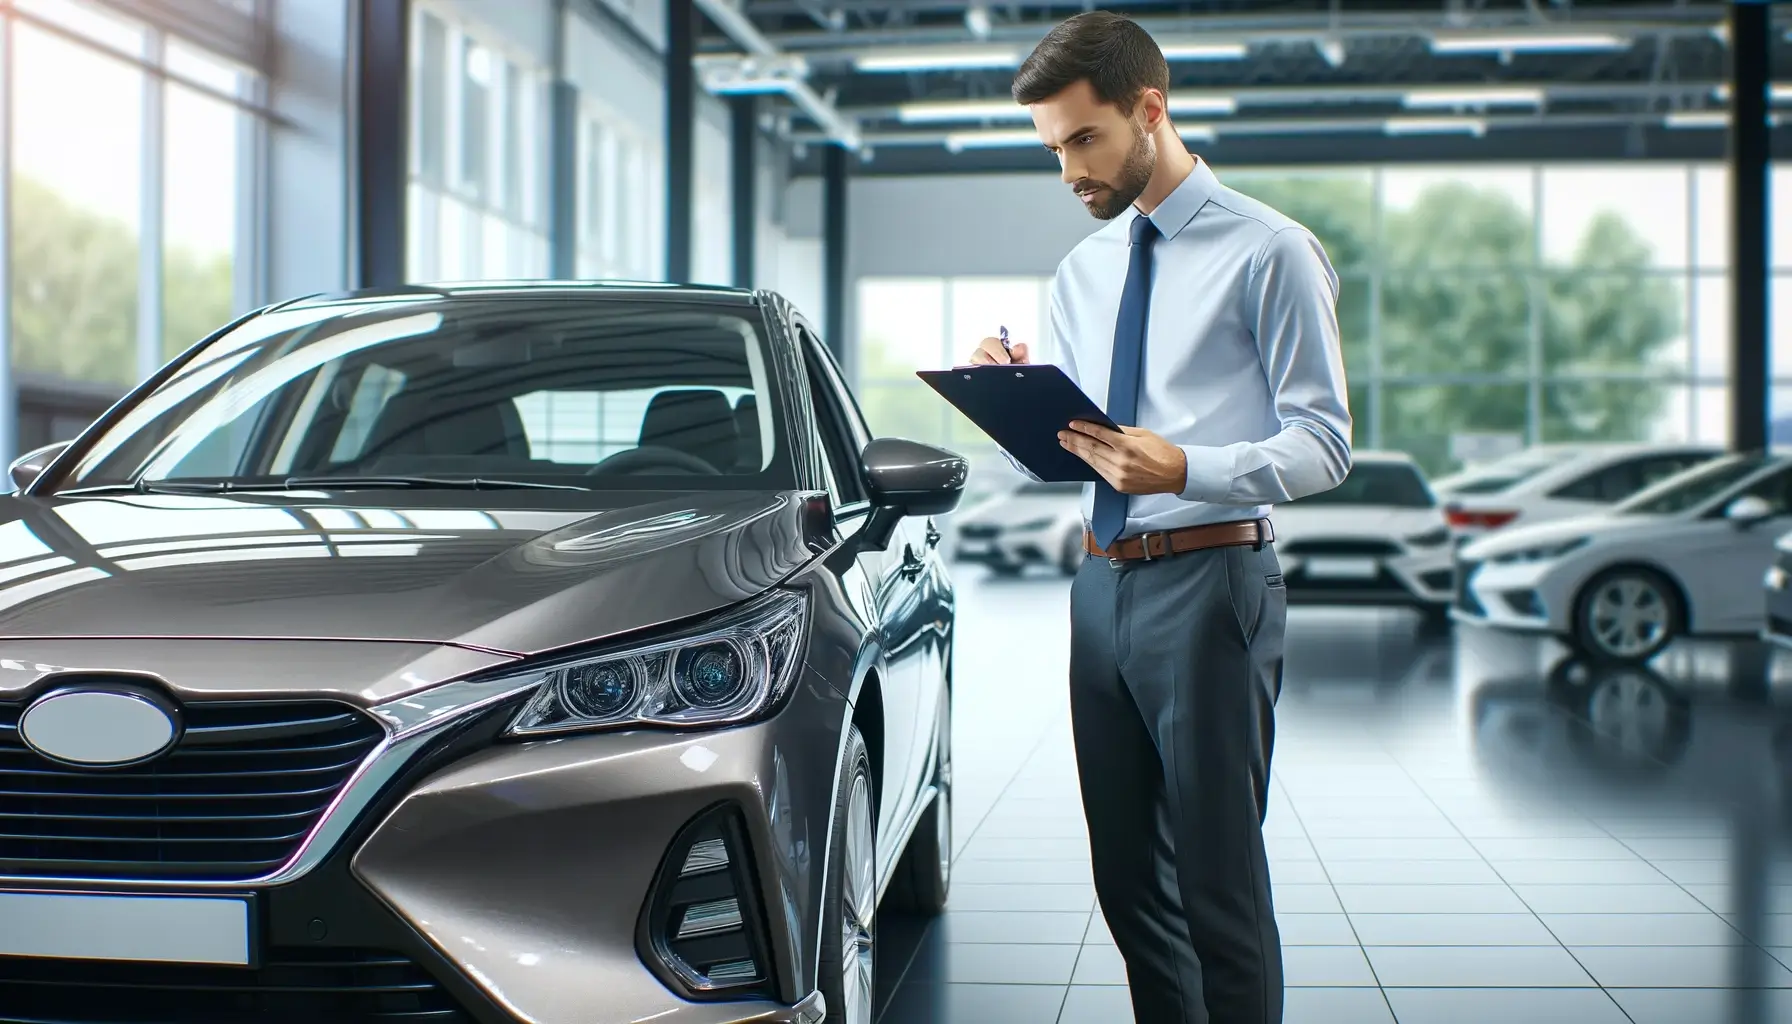 A well-maintained car being inspected by a Caucasian male appraiser at a car dealership, illustrating the process of professional vehicle trade-in appraisal, with various cars displayed in the background.